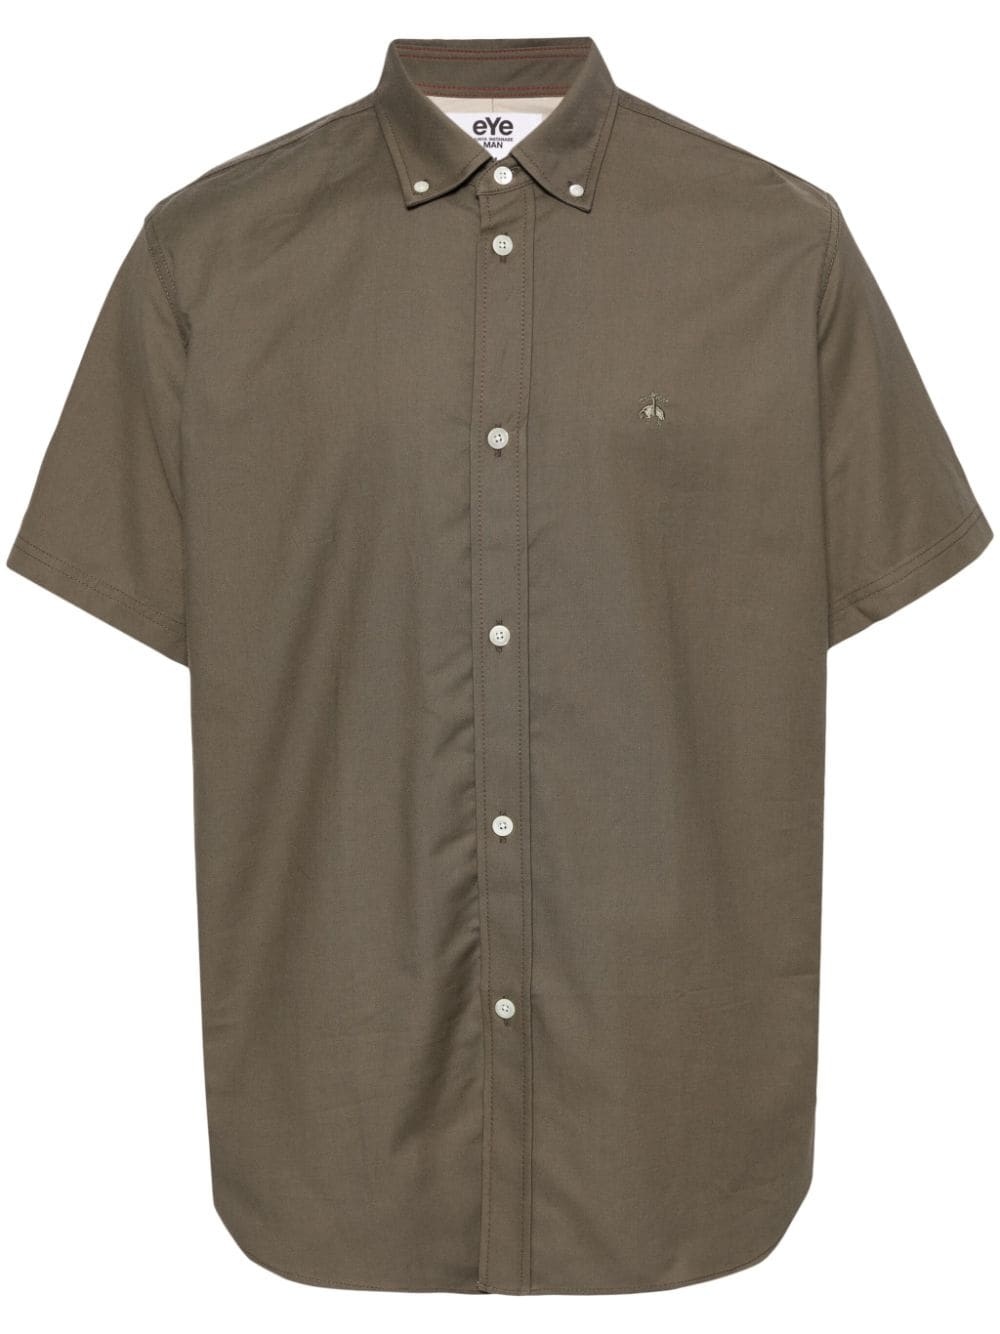 Cotton Oxford Brooks Brothers Shirt - 1